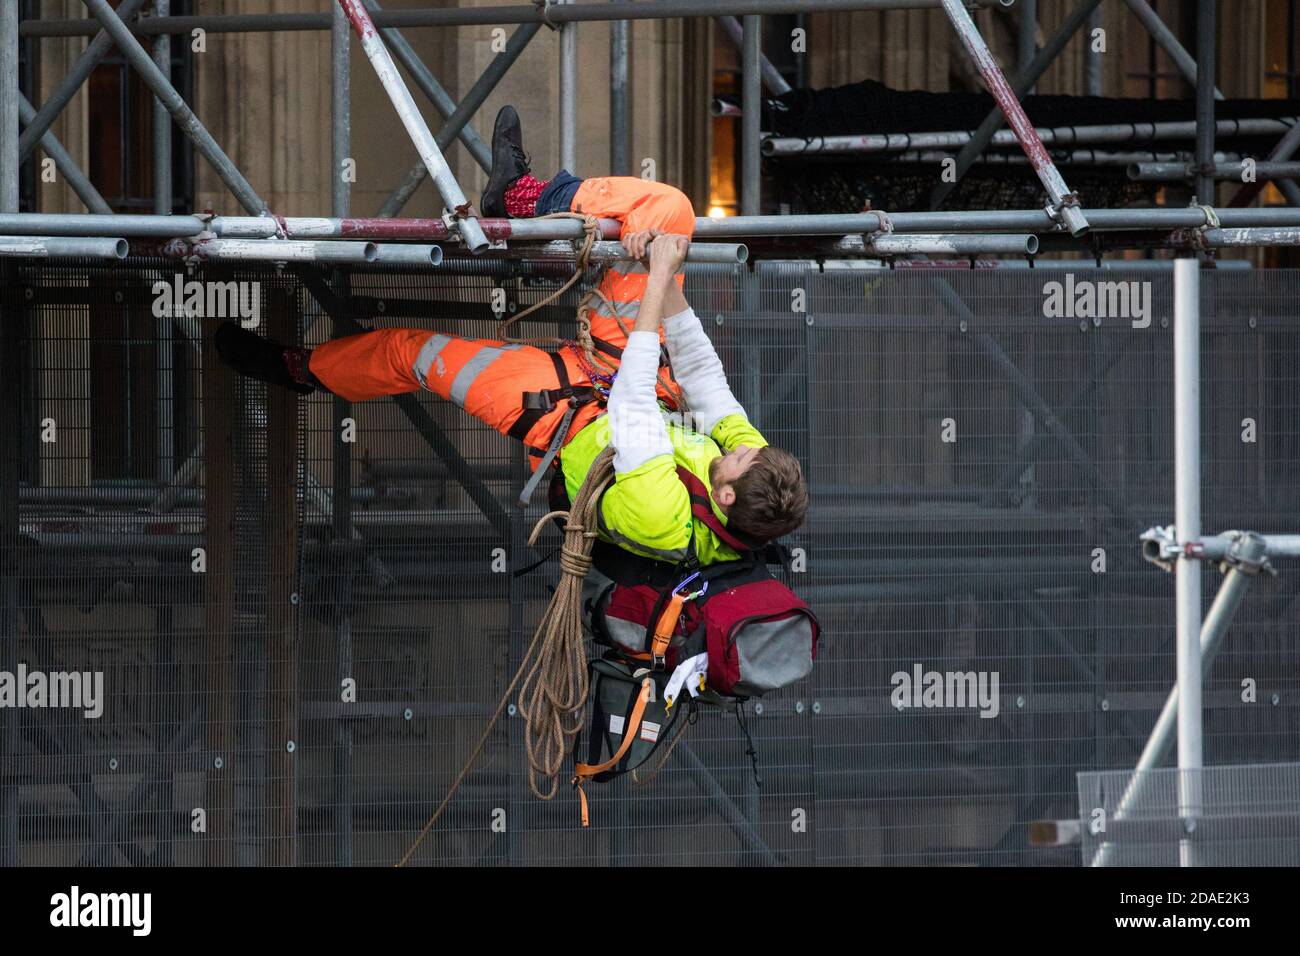 London, UK. 12th November, 2020. An activist from the group Action for Climate Truth and Reparations (ACTR) climbs scaffolding to hang an open letter to the UK people from Africans Rising For Justice, Peace and Dignity from the Houses of Parliament. The letter, which launches Africans Rising’s ReRight History campaign, contains a plea to the UK people to start making amends for the harm caused by slavery and colonialism.  Credit: Mark Kerrison/Alamy Live News Stock Photo